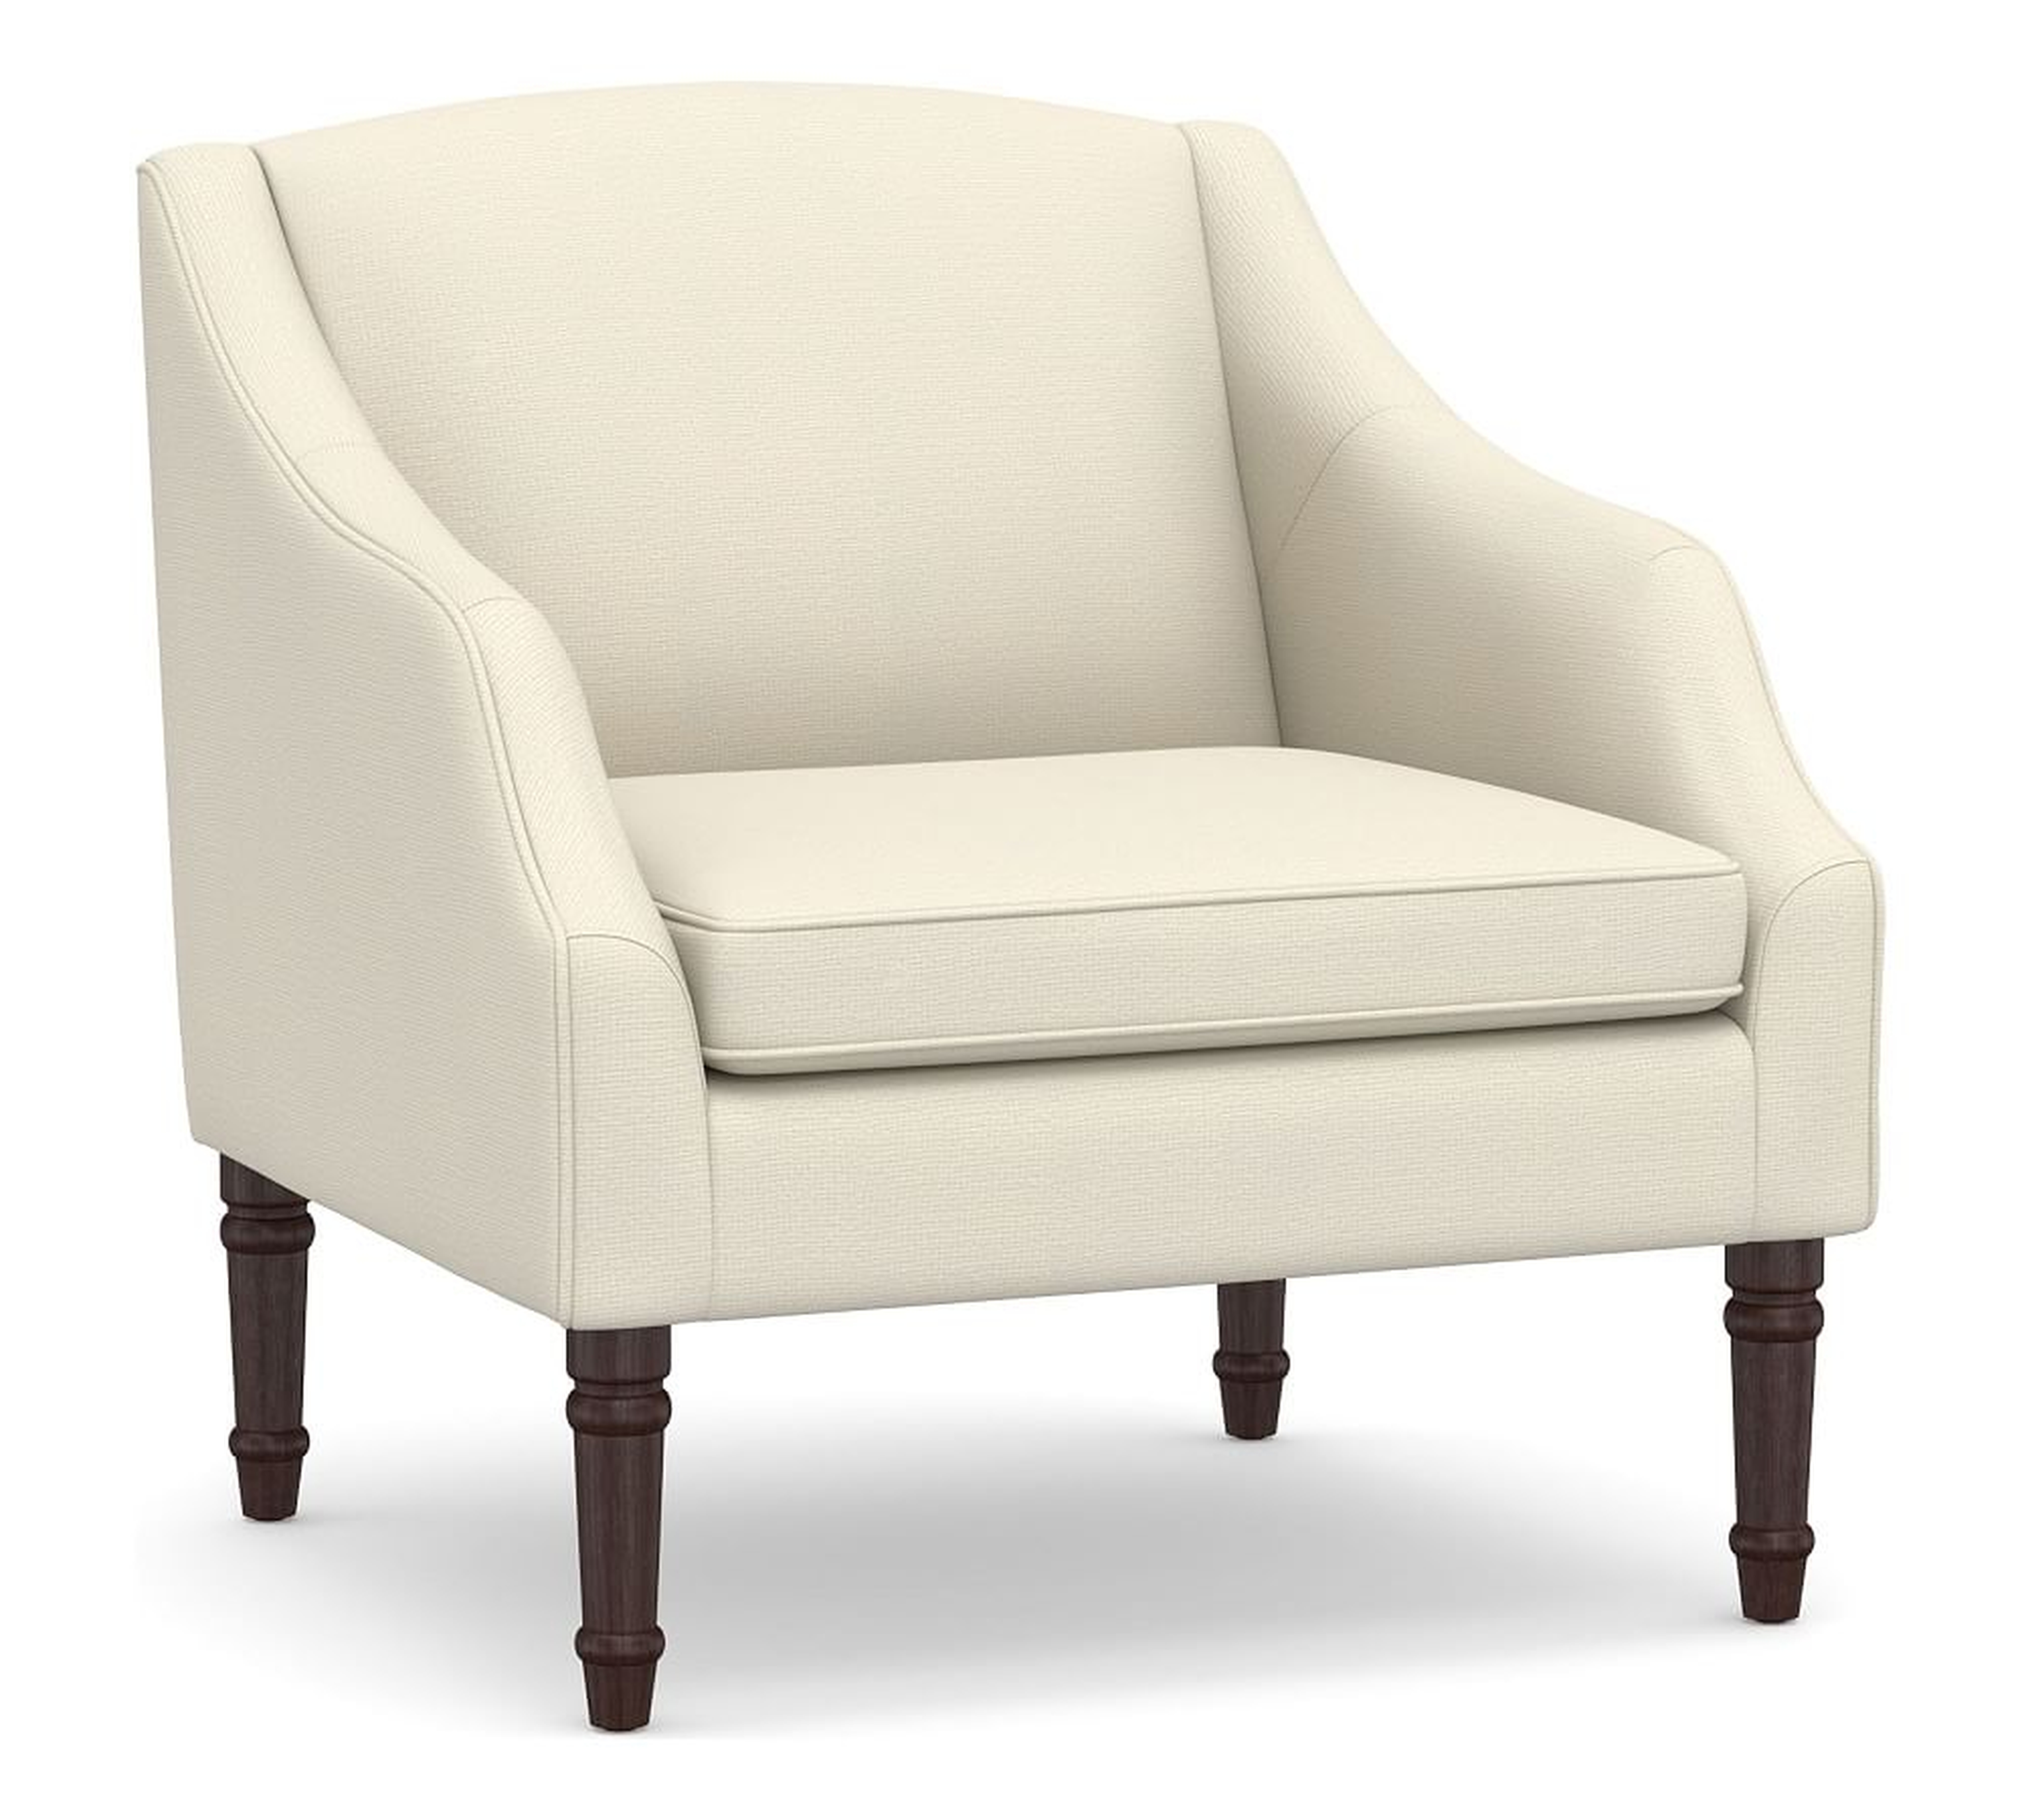 SoMa Emma Upholstered Armchair, Polyester Wrapped Cushions, Park Weave Ivory - Pottery Barn